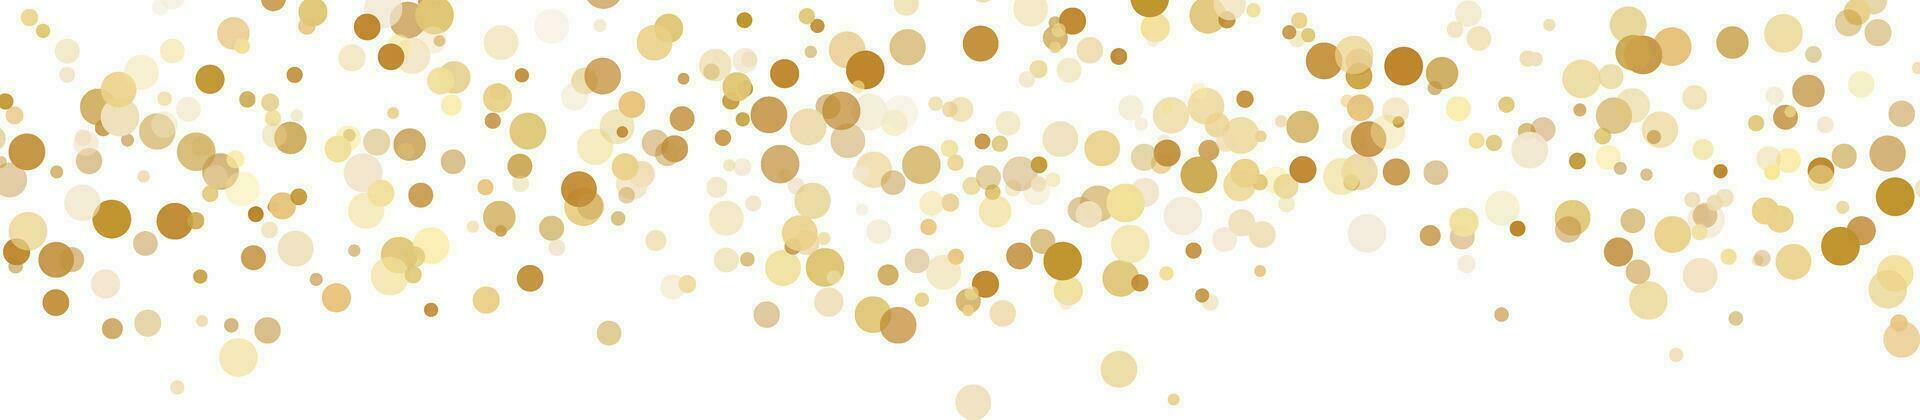 Golden circle confetti banner, isolated dot background, scattered random circles, luxury wallpaper vector